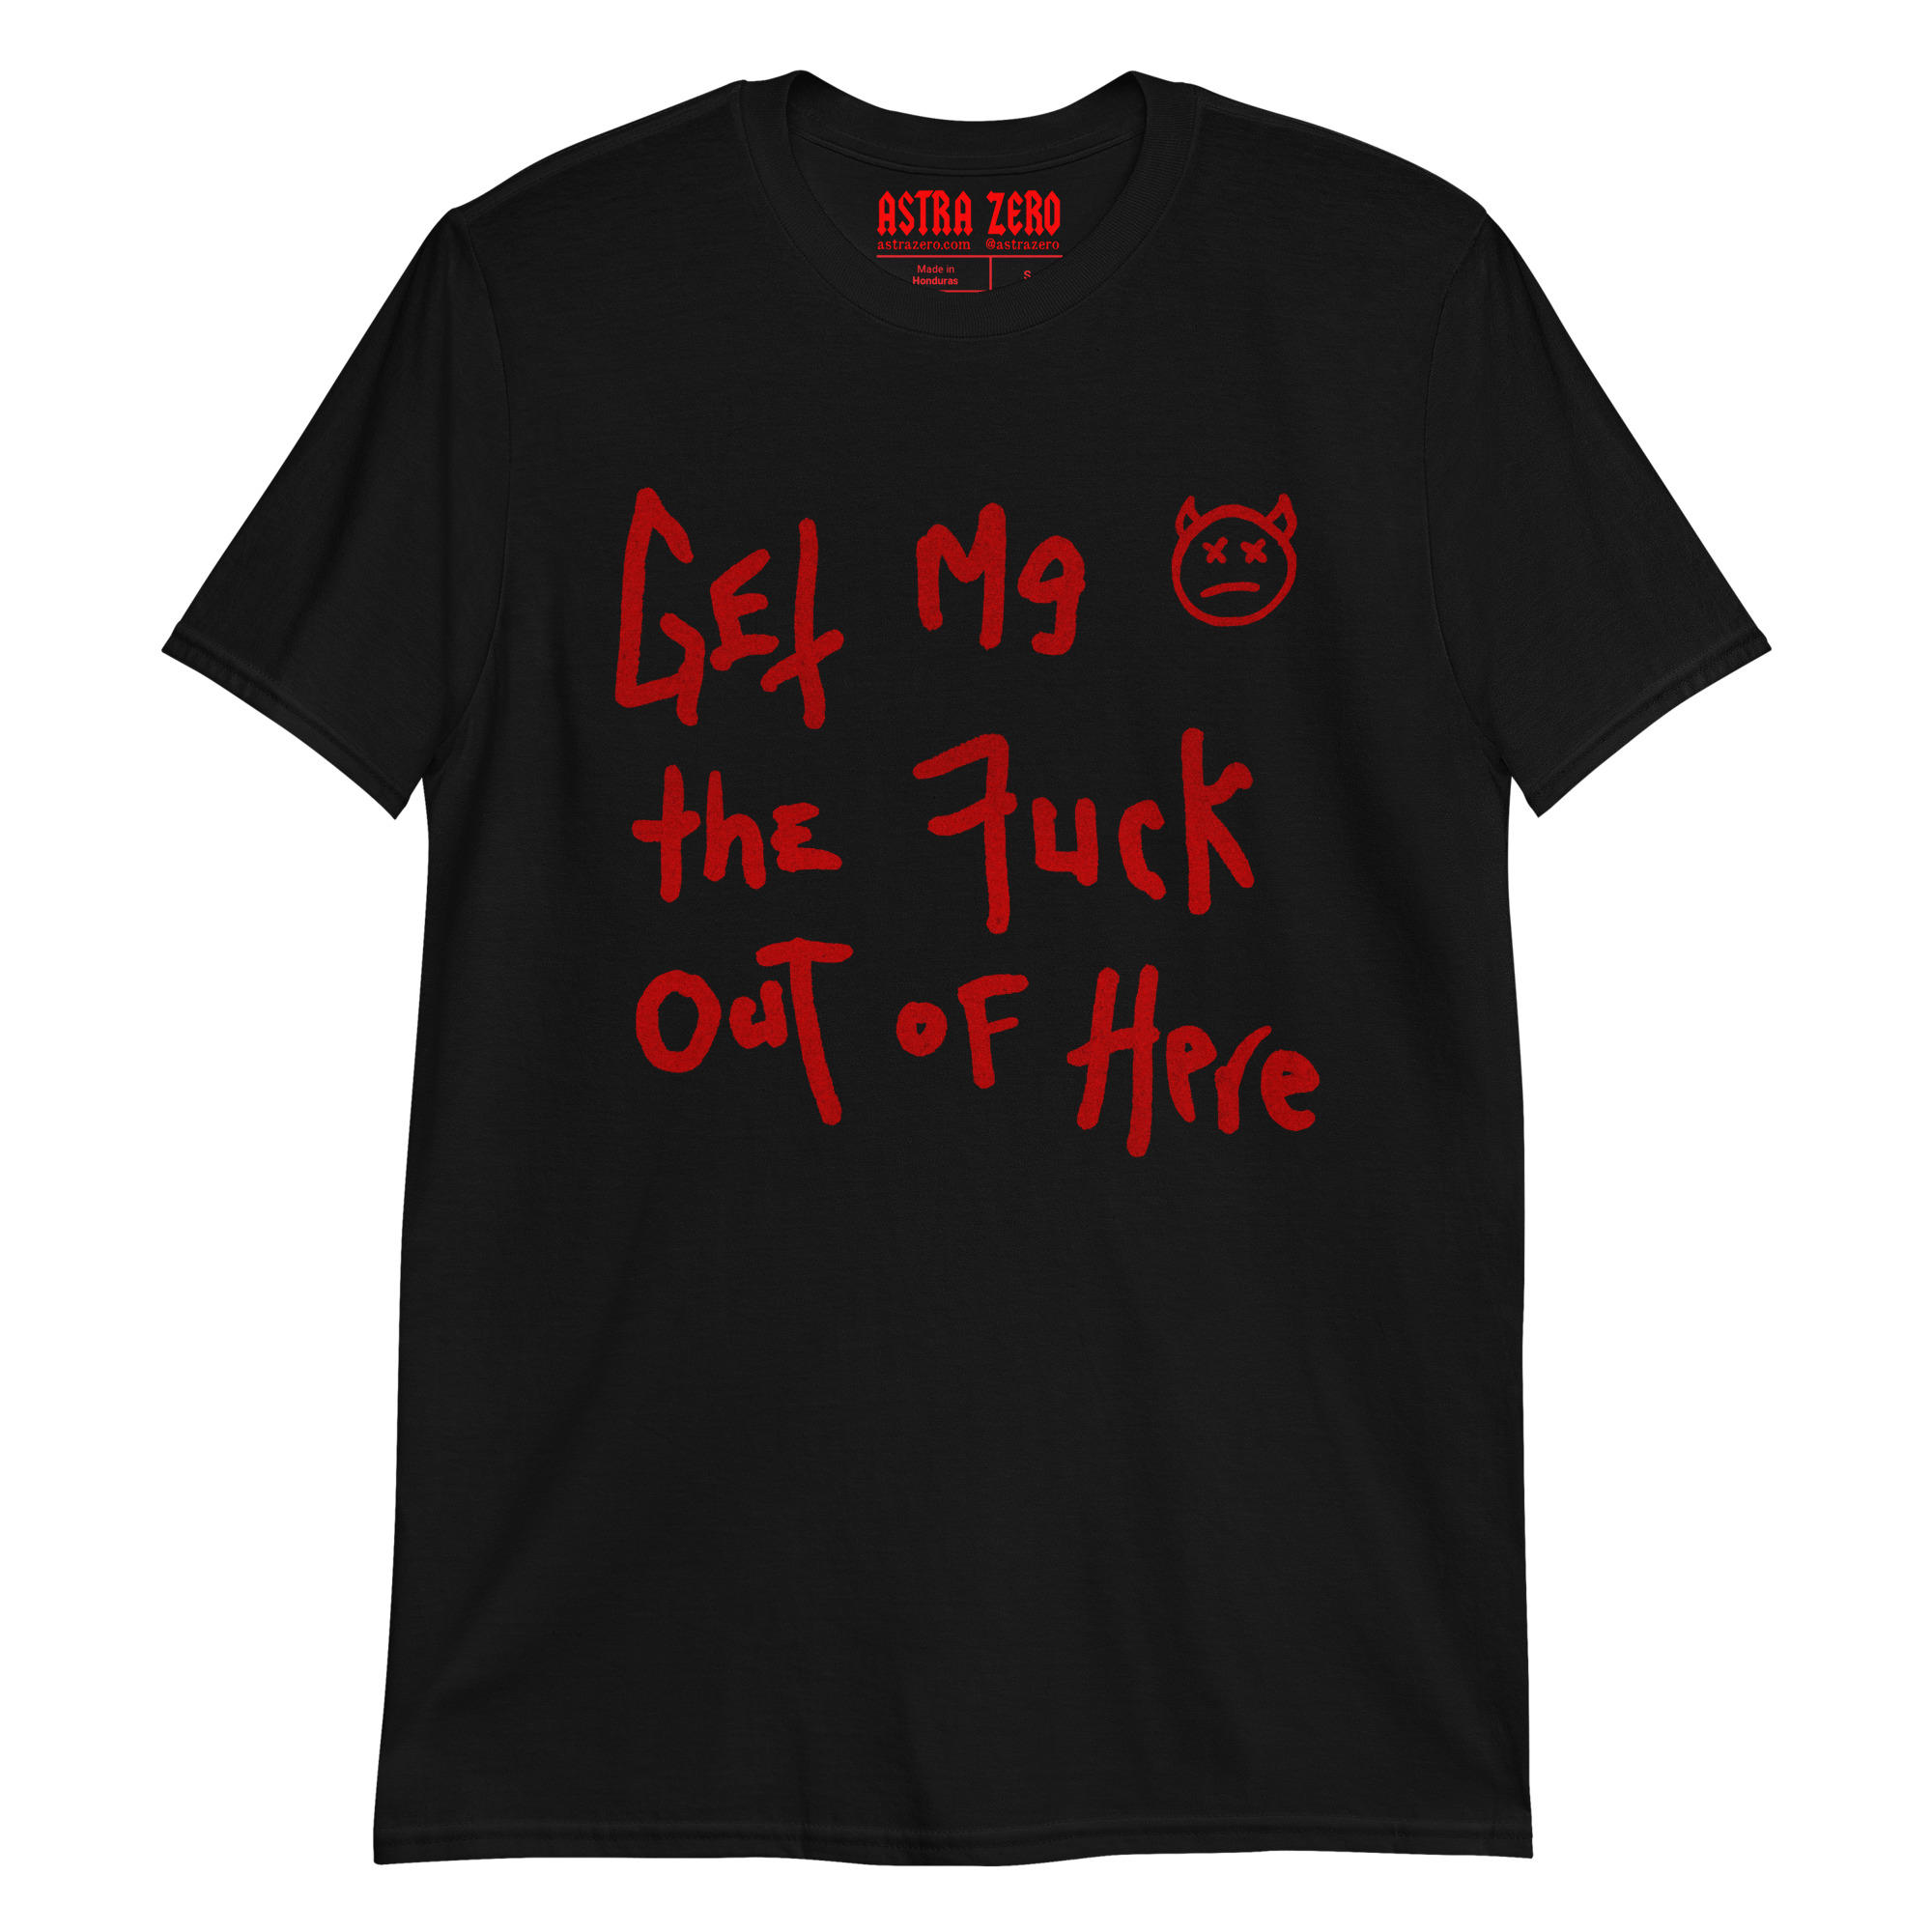 Featured image for “Get me the fxck out of here - Short-Sleeve Unisex T-Shirt”